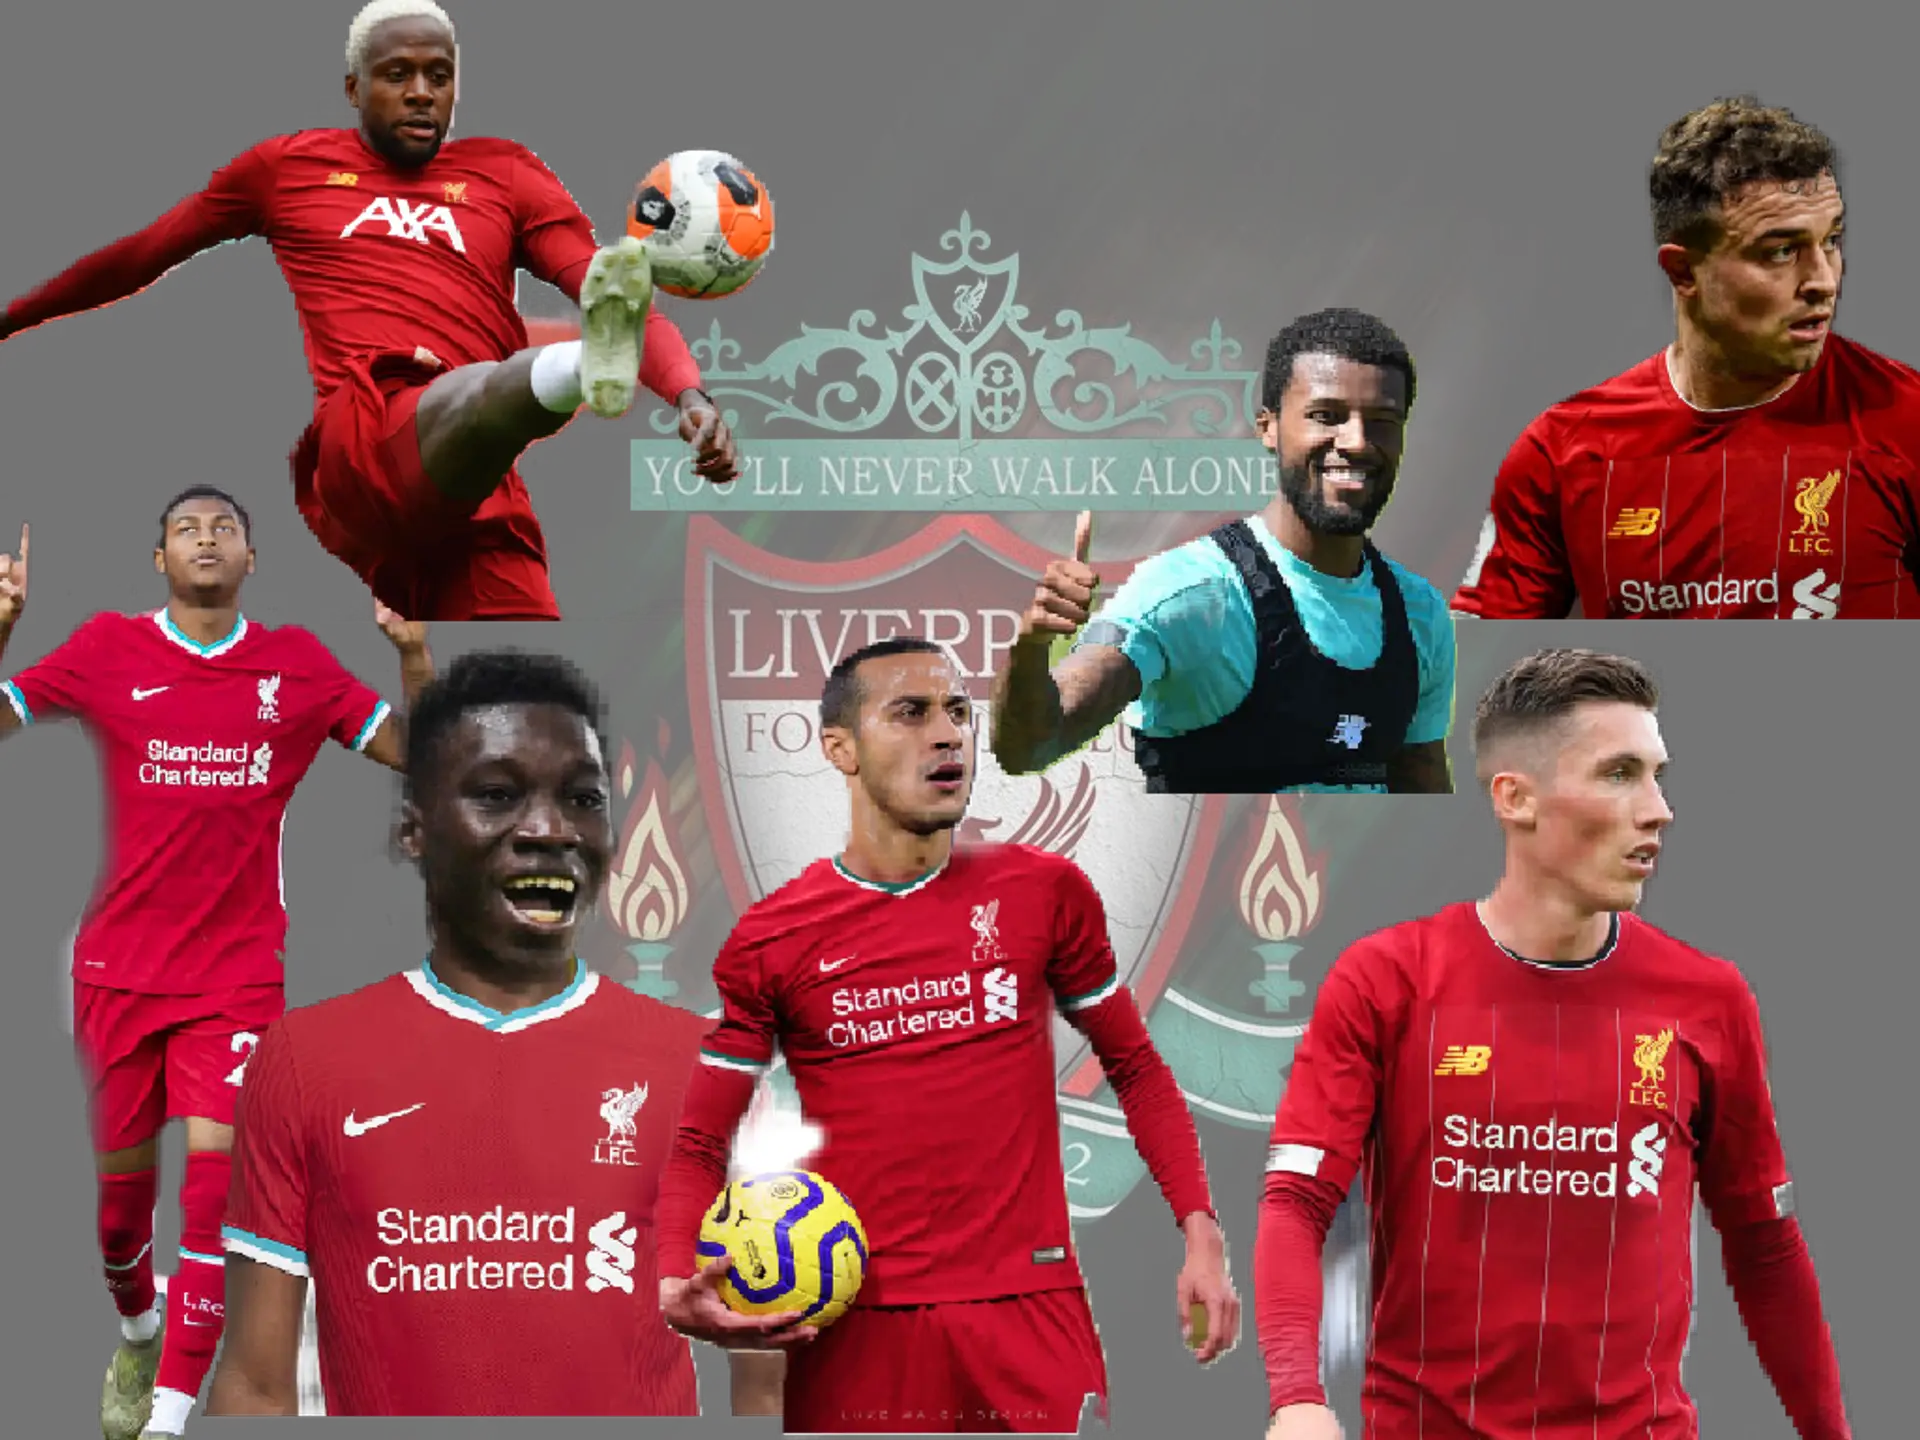 Buy, sell and keep: What I think Liverpool need to do this summer 